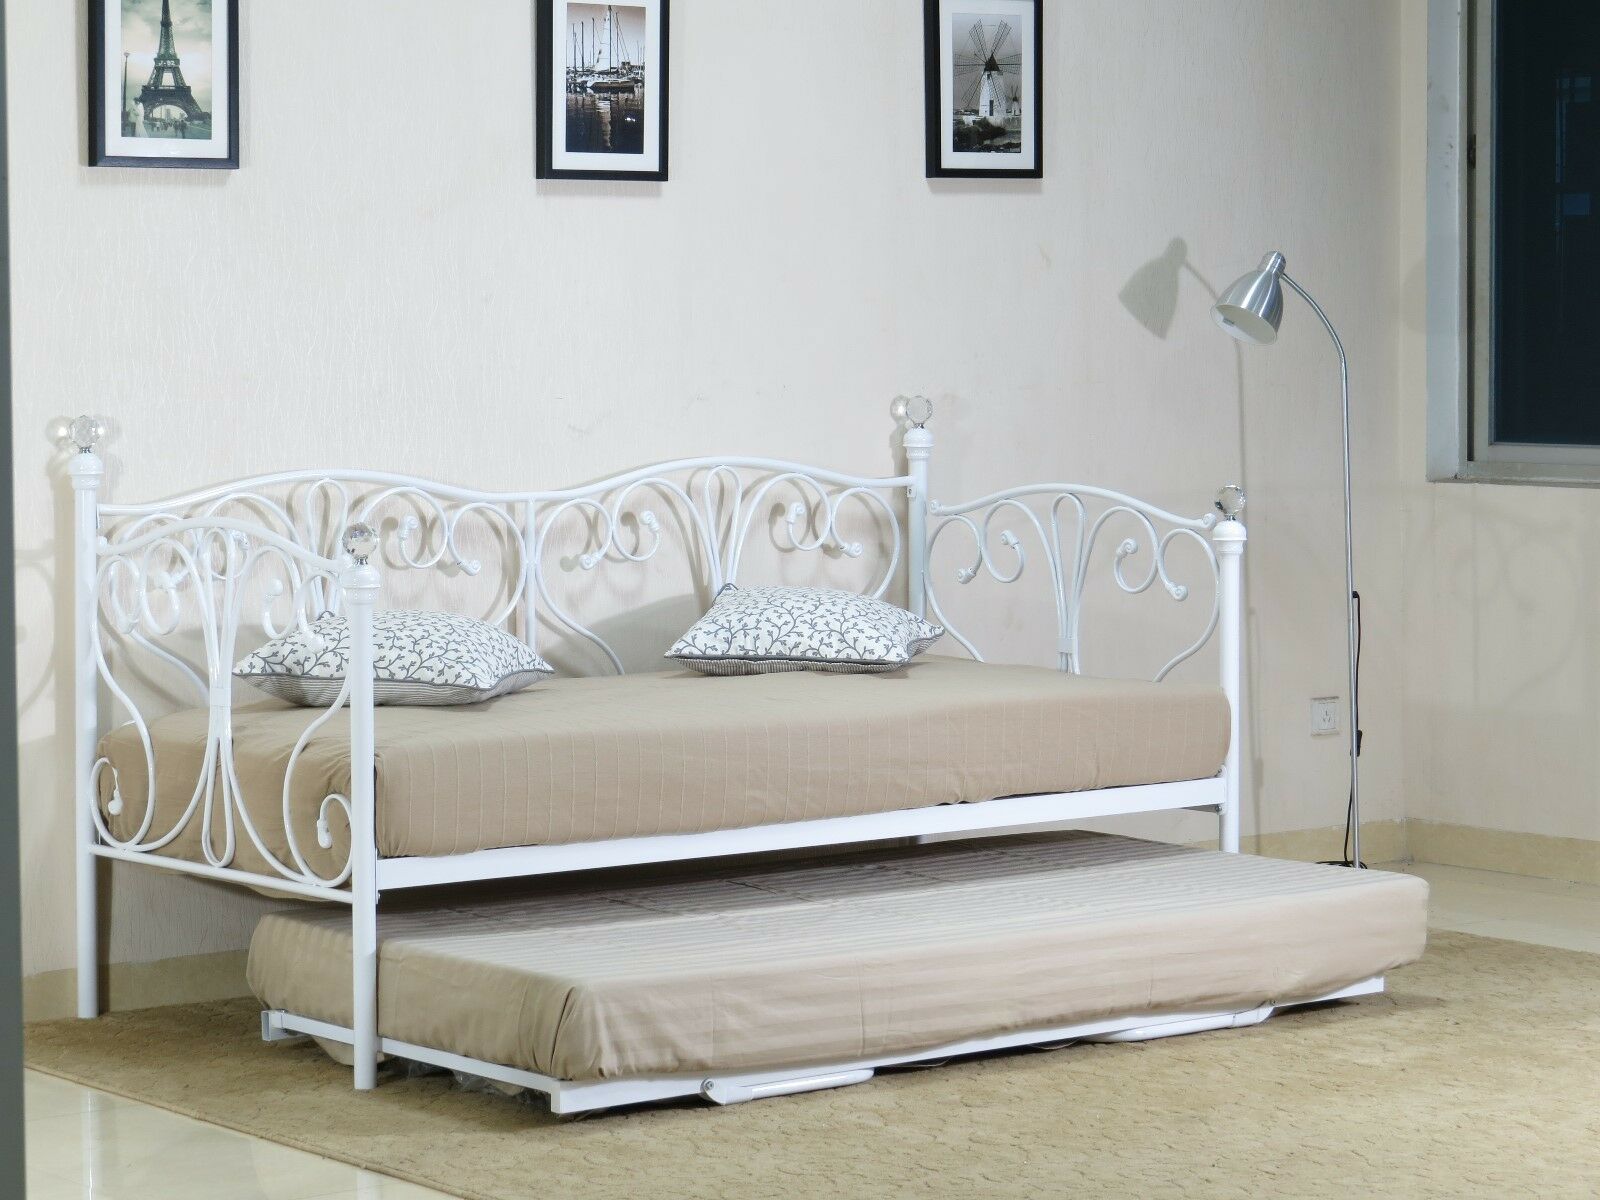 2ft6, 3ft Day bed and Trundle with Crystal finials in Black or White